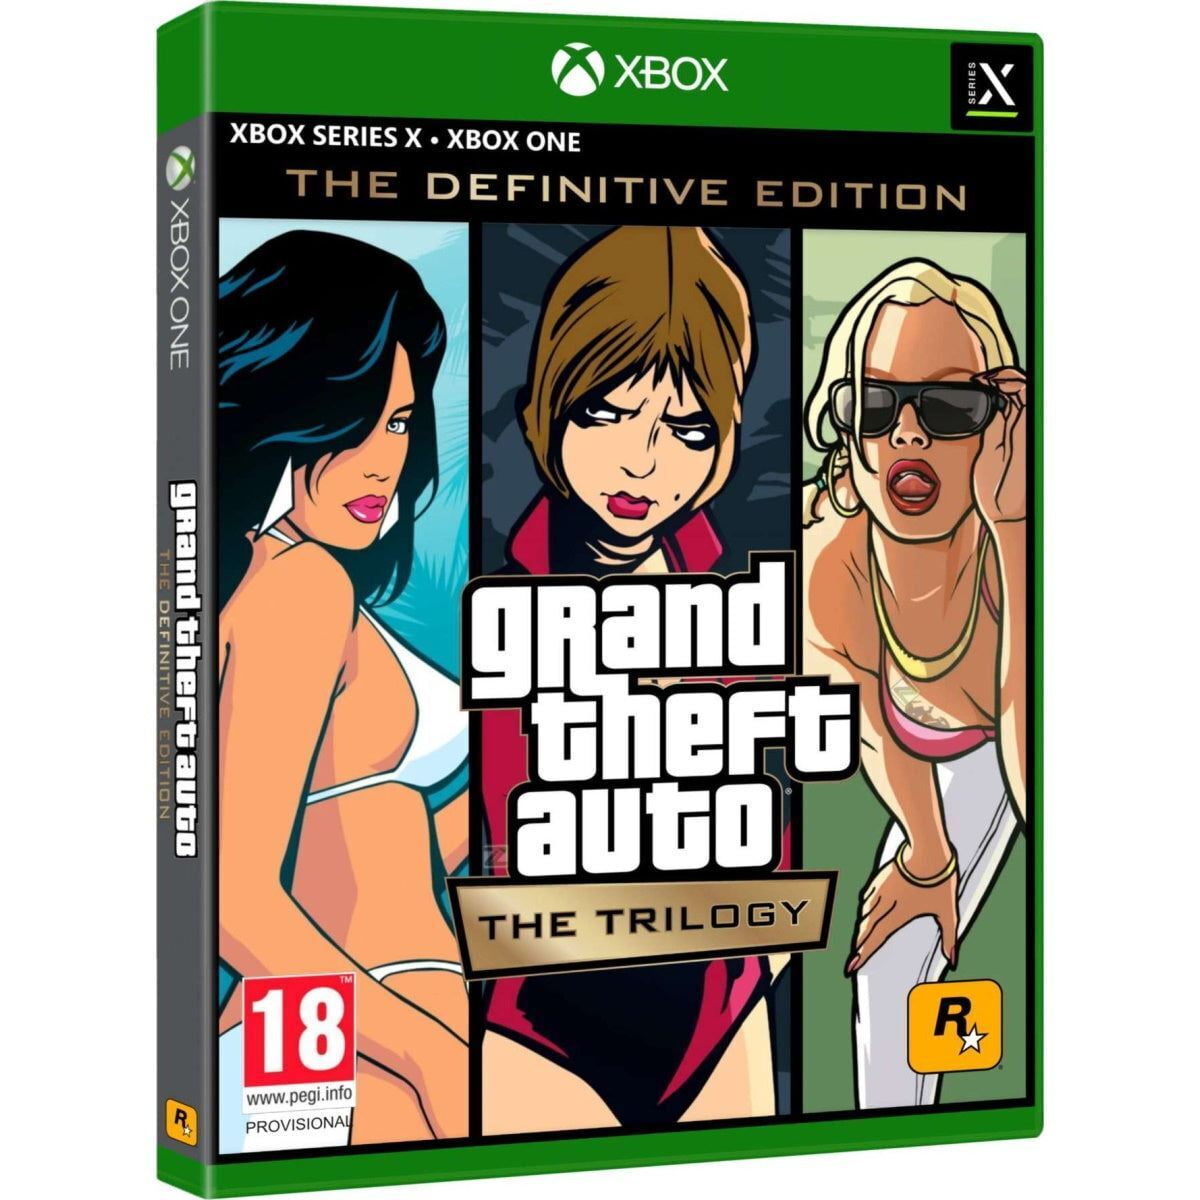 Grand Theft Auto: The Trilogy X] Series Edition Definitive [Microsoft Xbox - The